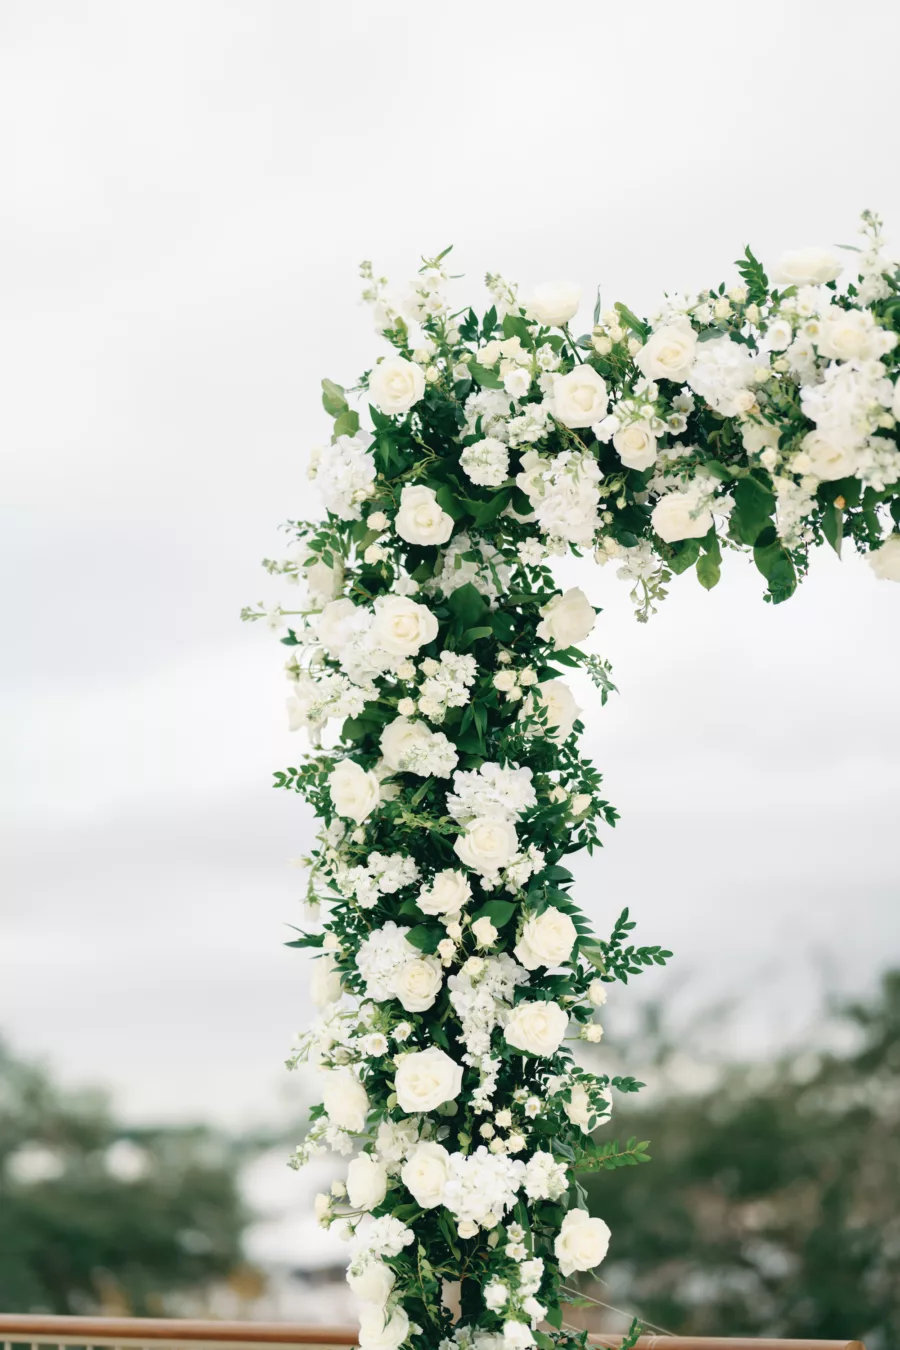 Timeless White Rose and Greenery Wedding Ceremony Arch Decor Inspiration